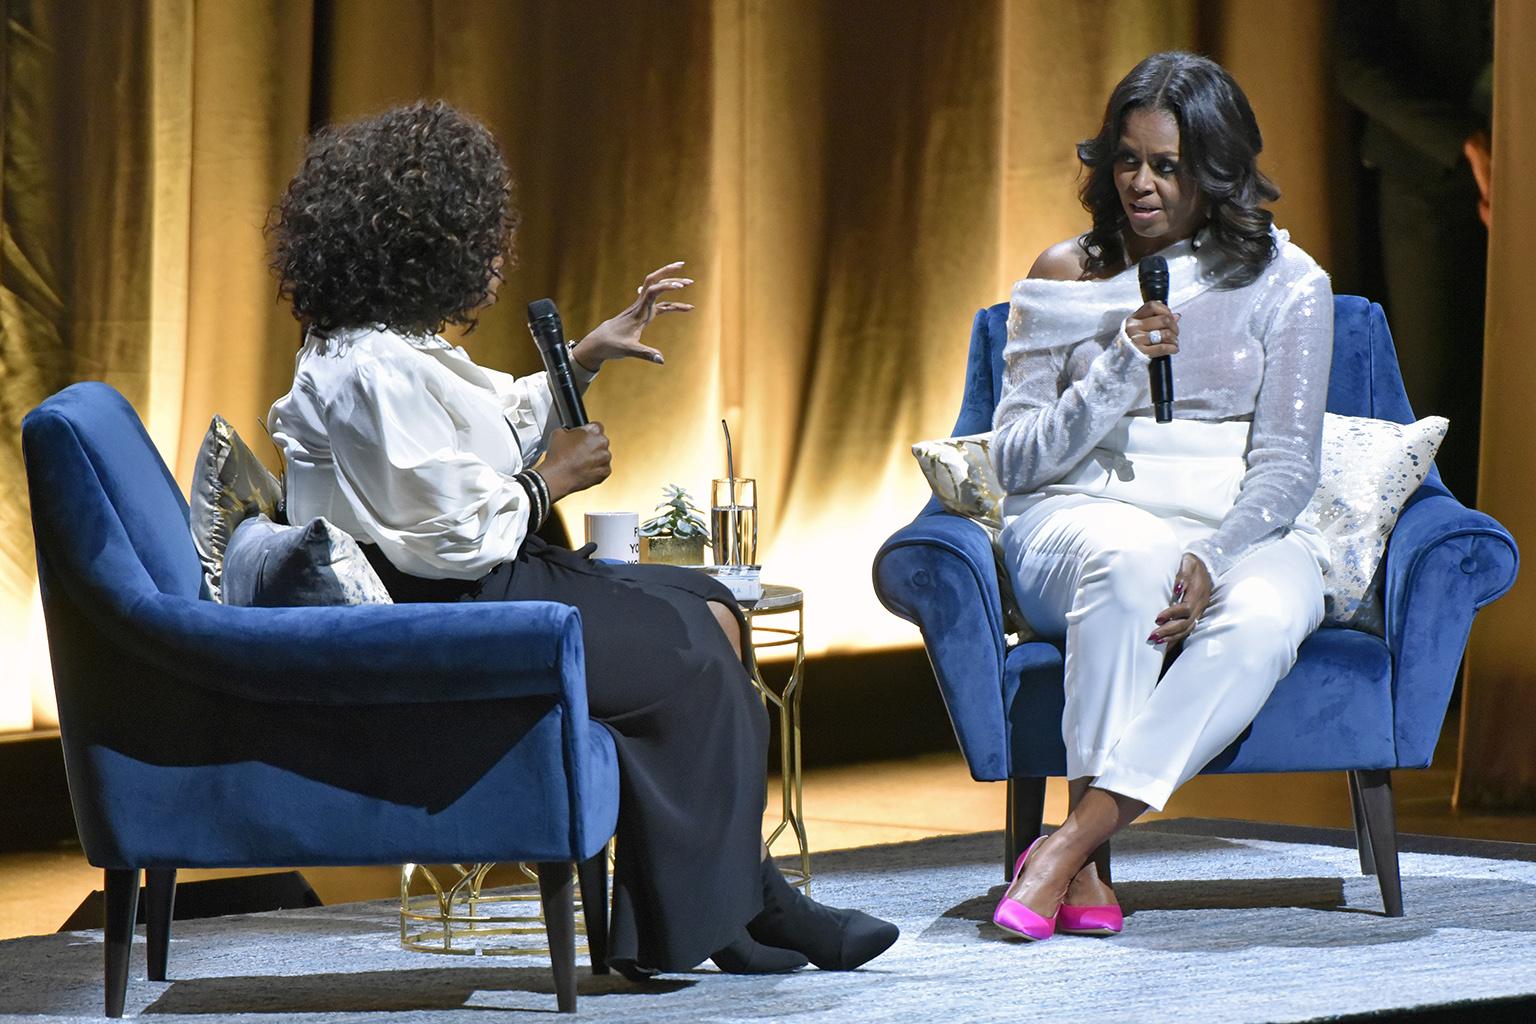 Michelle Obama, right, discusses her new book with Oprah Winfrey during an intimate conversation to promote “Becoming” at the United Center on Tuesday, Nov. 13, 2018. (Photo by Rob Grabowski / Invision / AP)